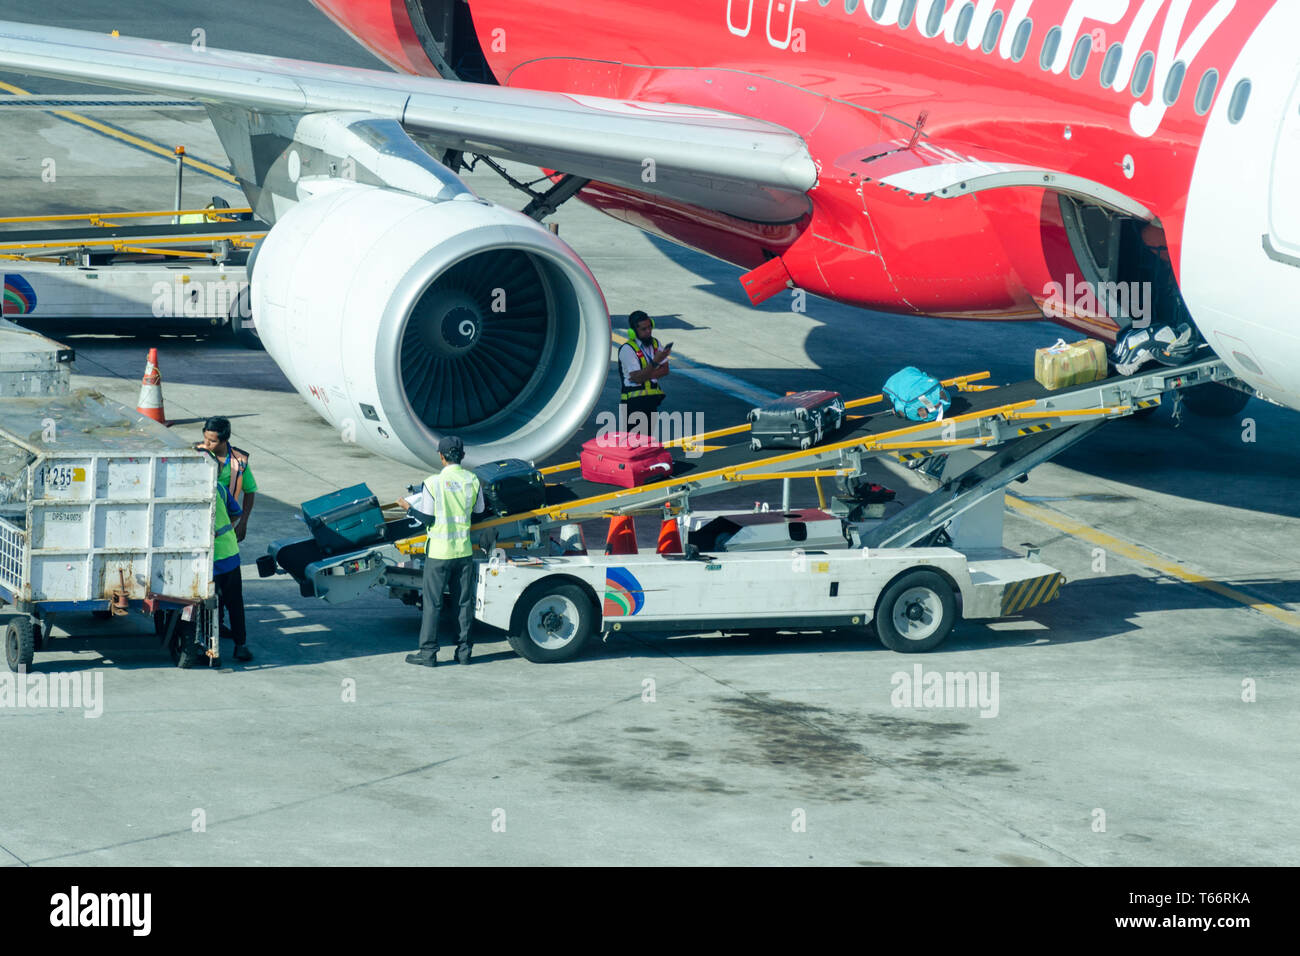 Bali, Denpasar, 2018-05-01: Airport luggage workers loading bags into airplane. Travel and industry concepts. Stock Photo